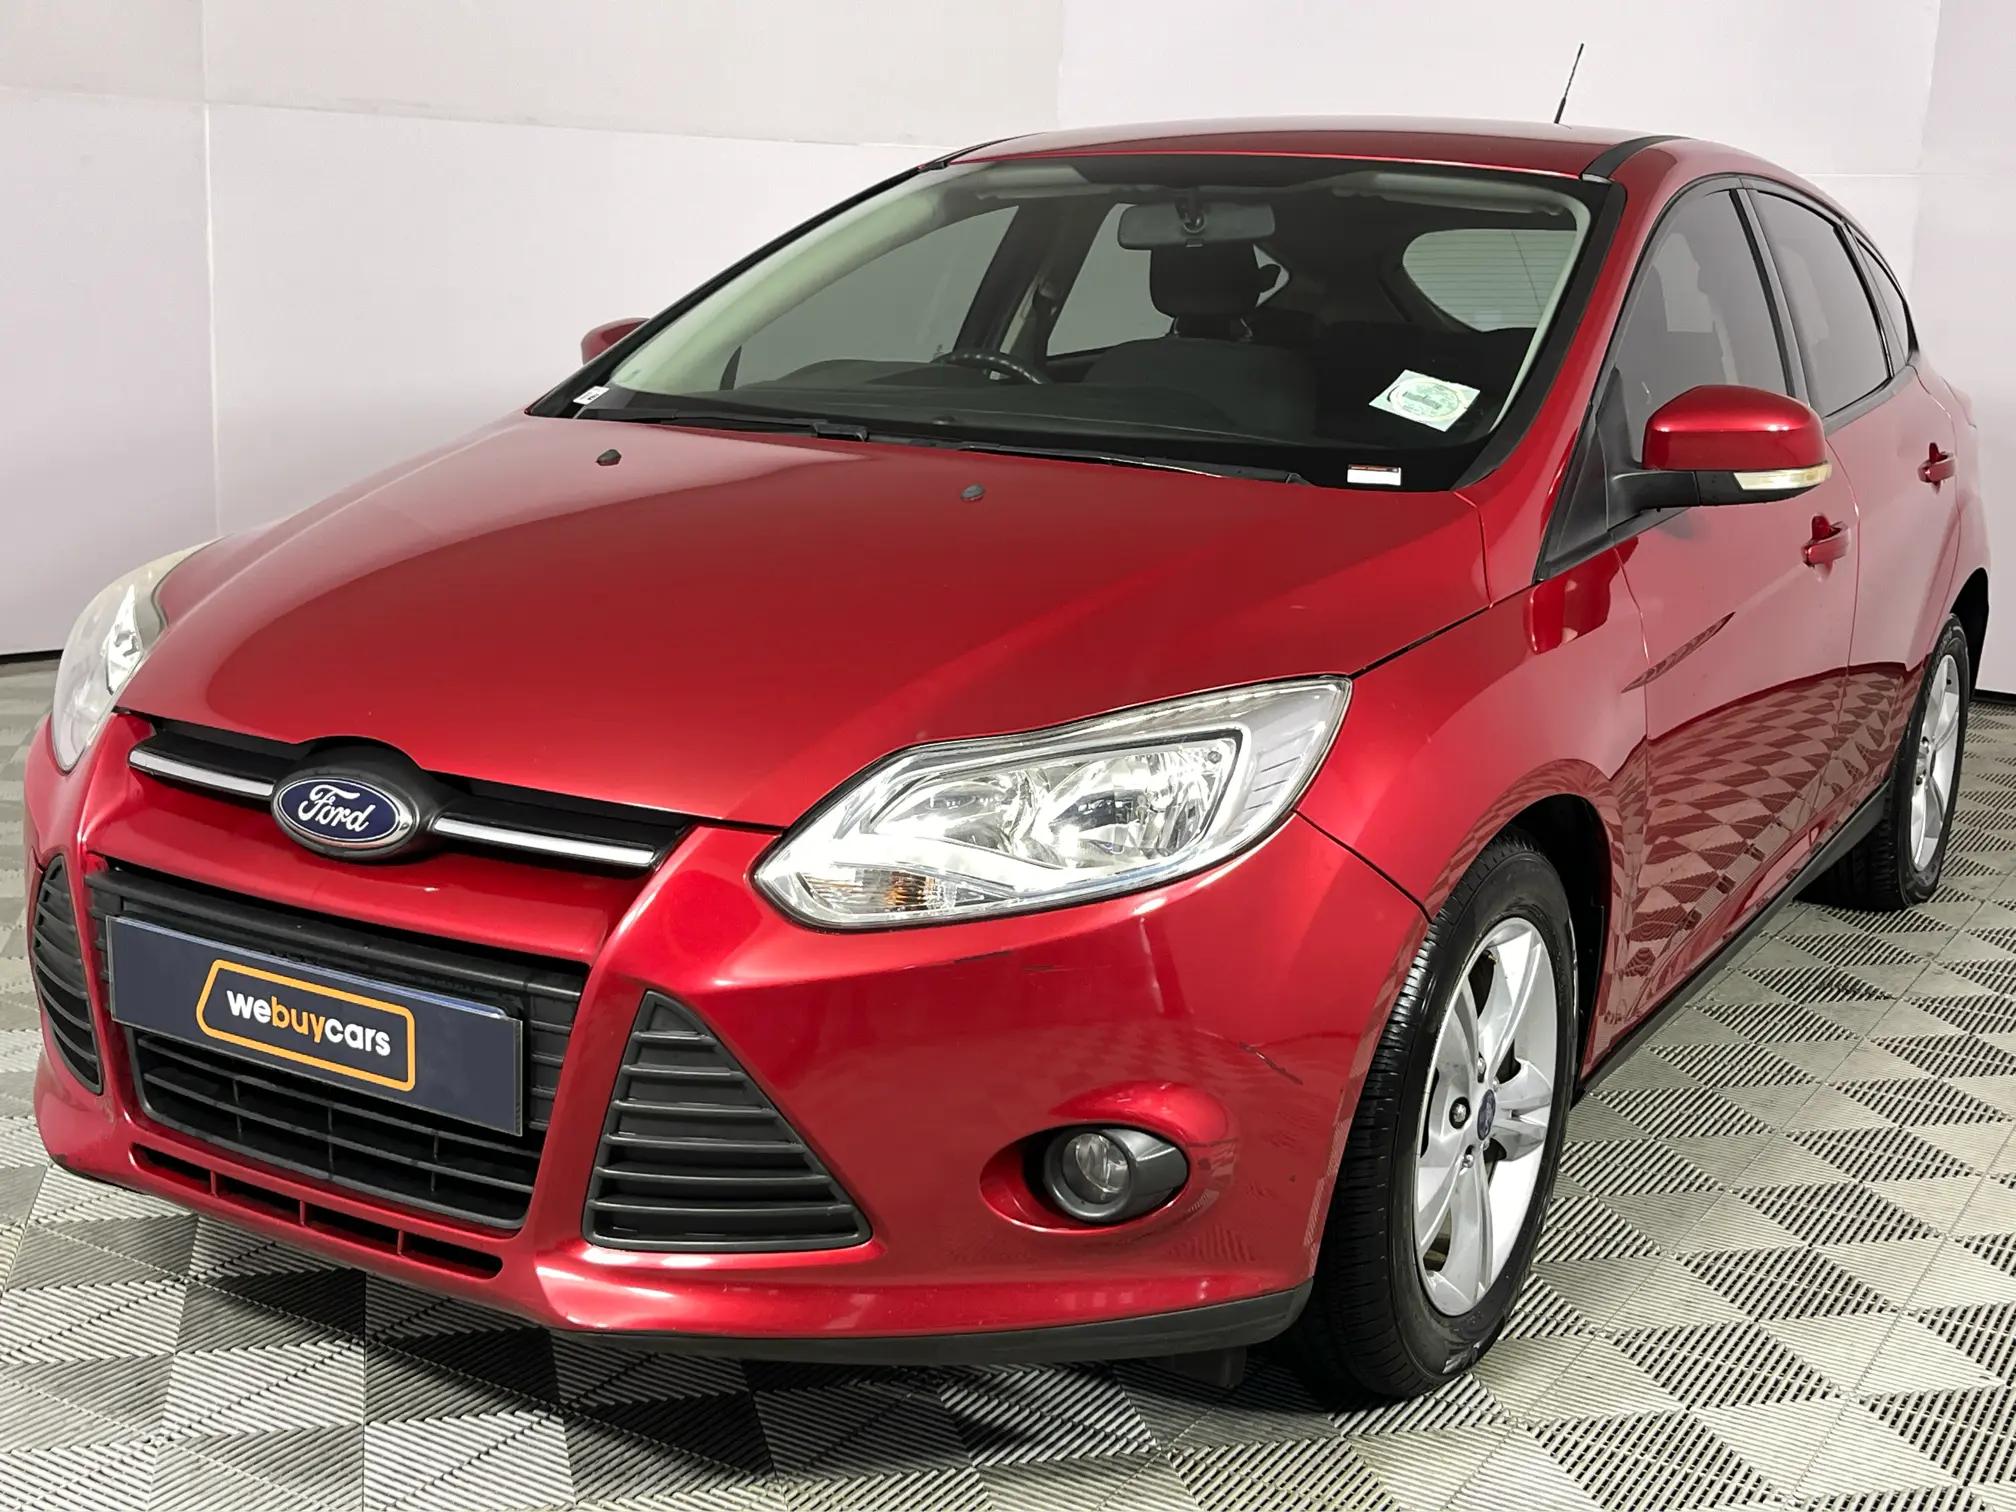 Ford Focus 2.0 TDCi (120 kW) Trend Hatch Back Powershift